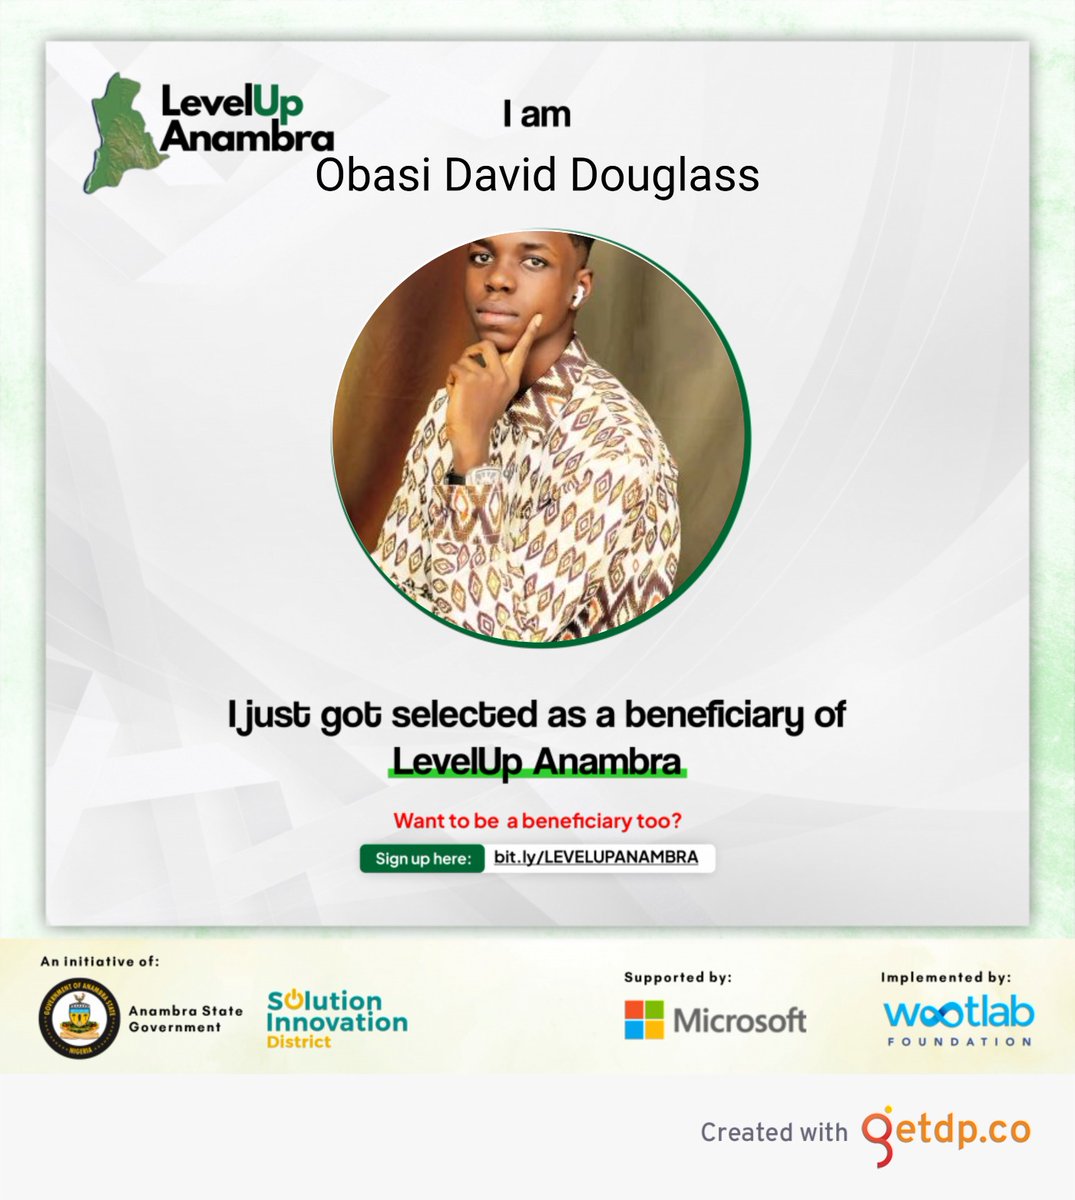 I got accepted into the LevelUp Anambra Digital Skills Training Program; Powered by the Solution Innovation District of Anambra State Government in Partnership with Microsoft and Wootlab Foundation.

#LevelUpAnambra #solutioninnovationdistrict #SID #wootlabfoundation